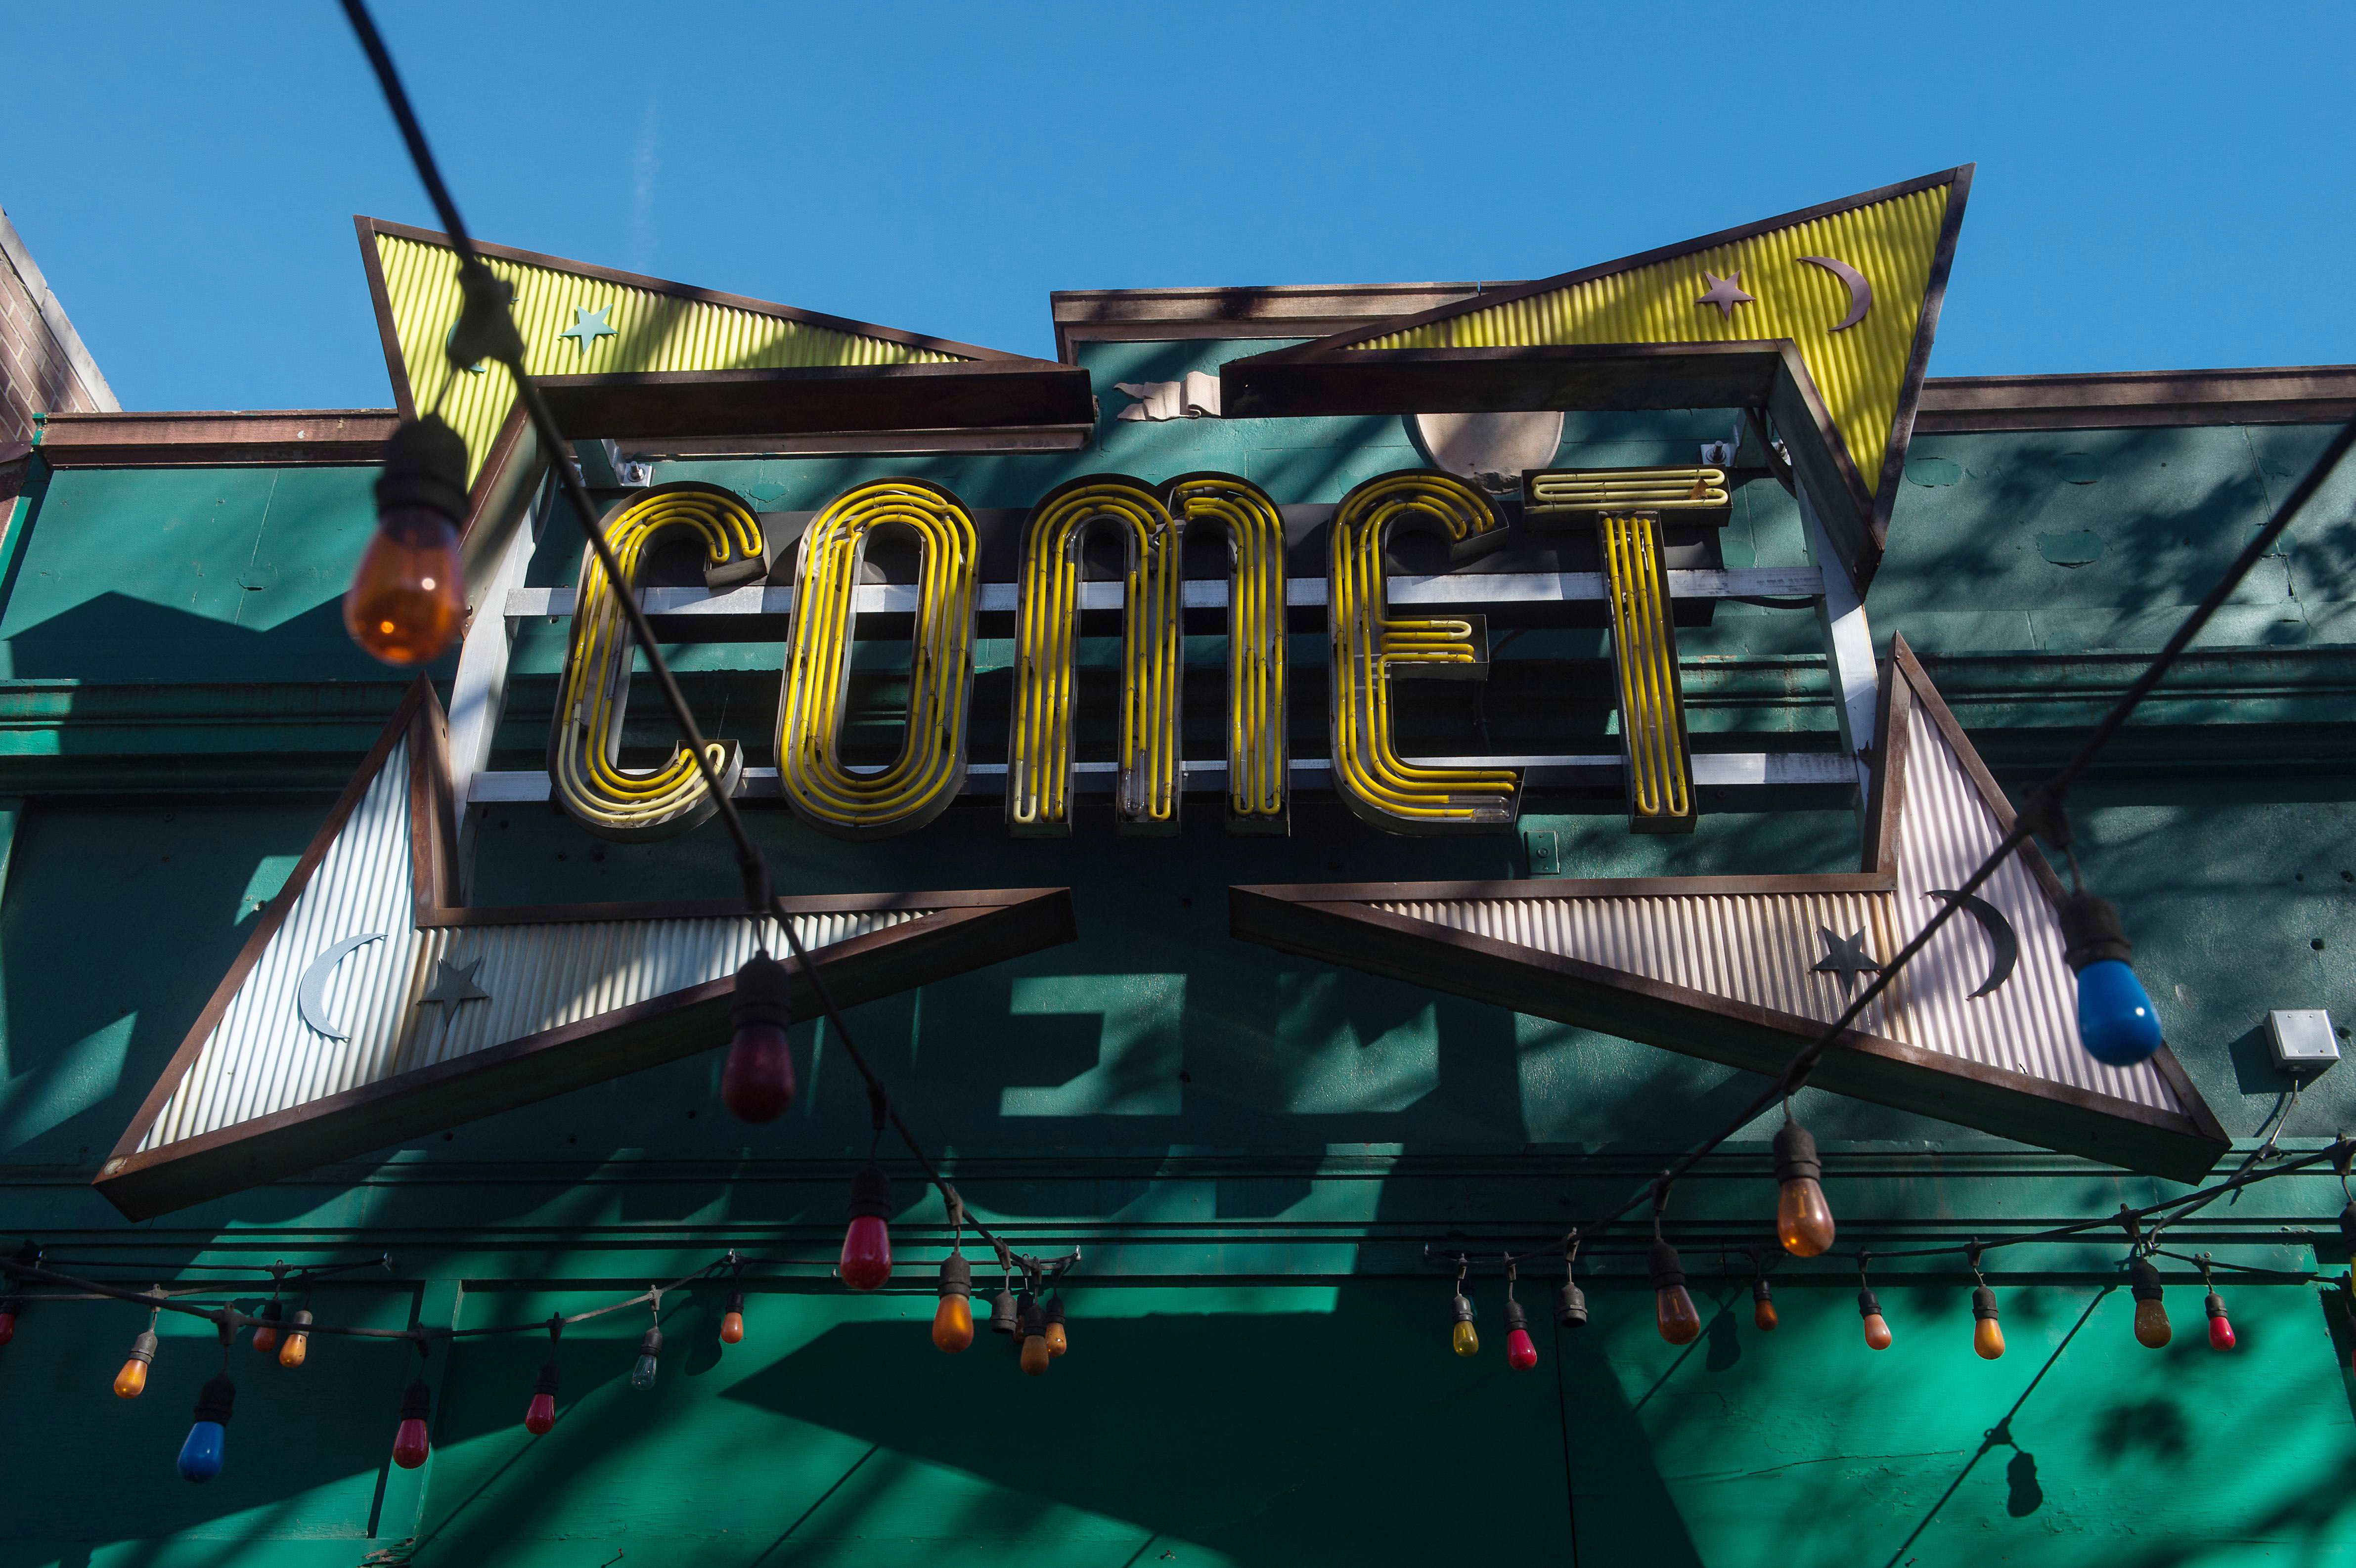 The sign for the Comet Ping Pong restaurant is seen in Washingon, DC, on December 5, 2016. An assault rifle-wielding gunman's appearance at a Washington pizzeria that was falsely reported to house a pedophile ring has elevated worries over the unrelenting rise of fake news and malicious gossip on the internet. No one was injured when 28-year-old Edgar Maddison Welch strode into the Comet Ping Pong restaurant, packed with families on a Sunday afternoon, and fired off a round from his AR-15.